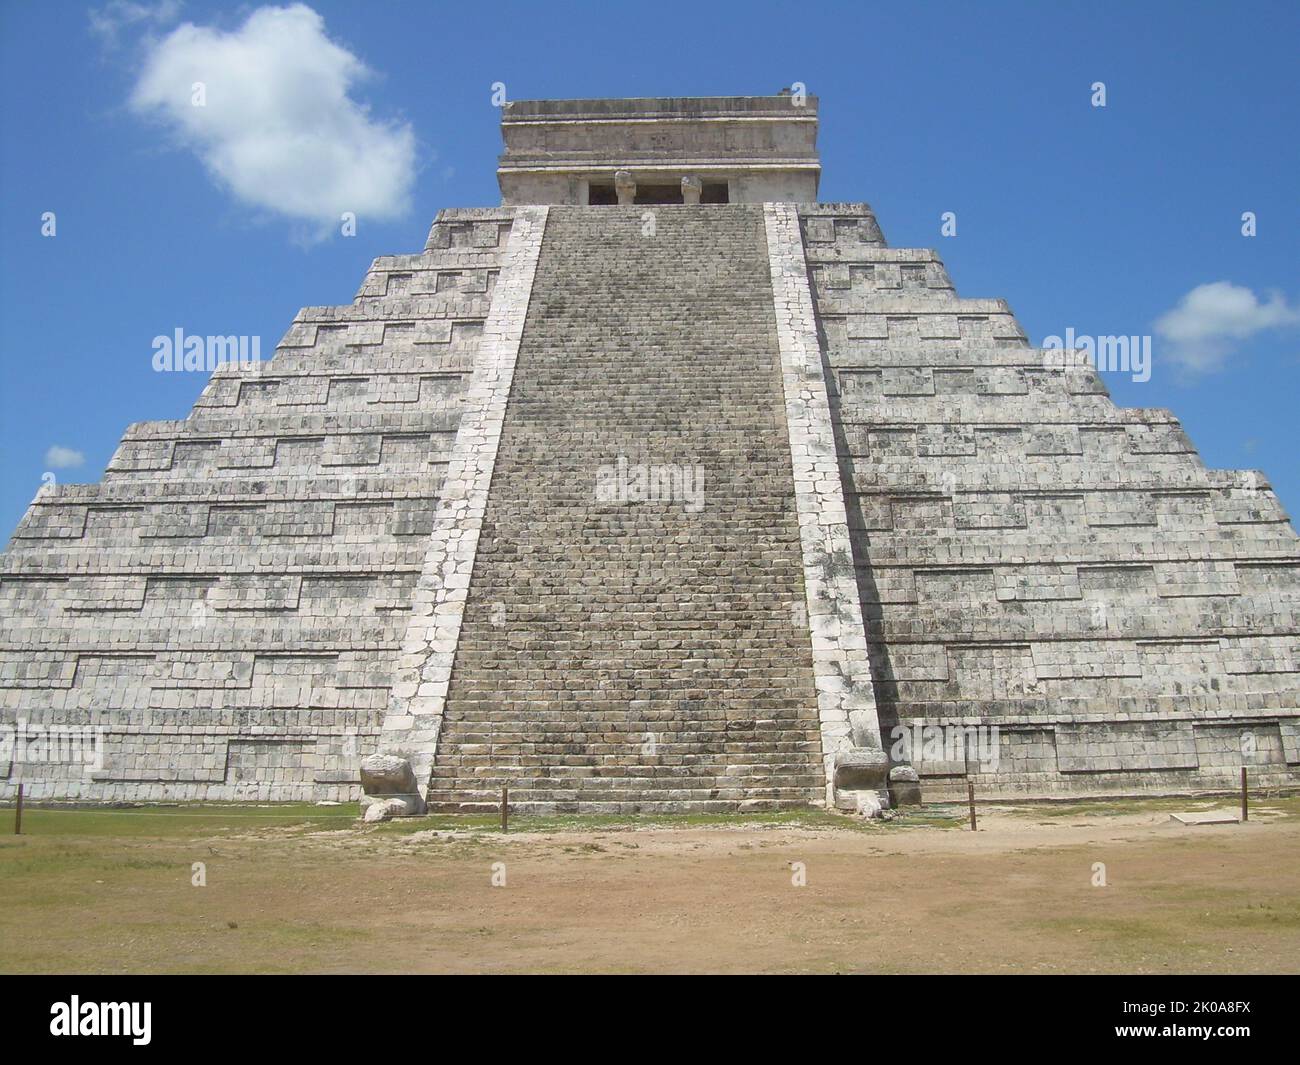 La Piramide, known as the Temple of Kukulca, a Mesoamerican step-pyramid that dominates the centre of the Chichen Itza archaeological site in the Mexican state of Yucatan. The pyramid building is more formally designated by archaeologists as Chichen Itza Structure 5B18. Built by the pre-Columbian Maya civilization between the 8th and 12th centuries AD, the pyramid served as a temple to the deity Kukulcan, the Yucatec Maya Feathered Serpent deity closely related to Quetzalcoatl Stock Photo